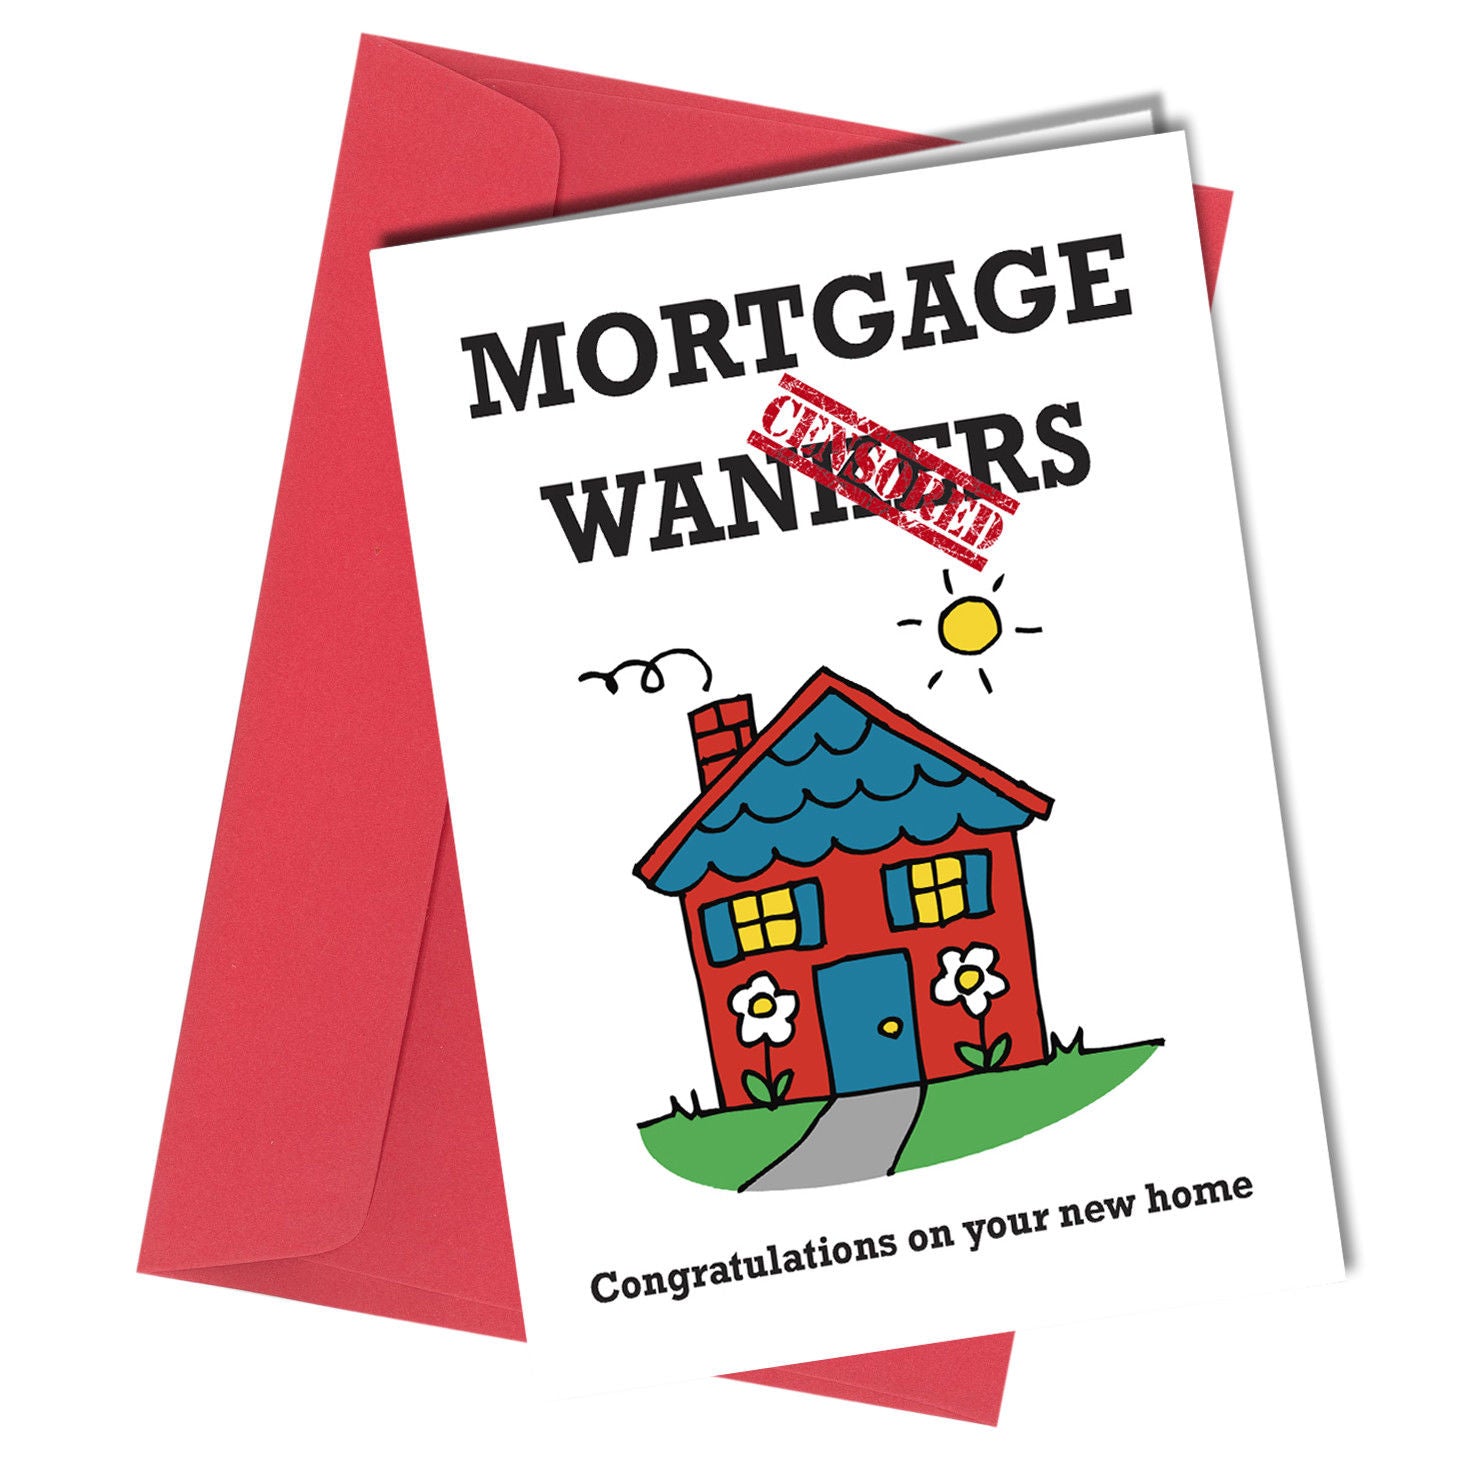 #15 Mortgage Wankers